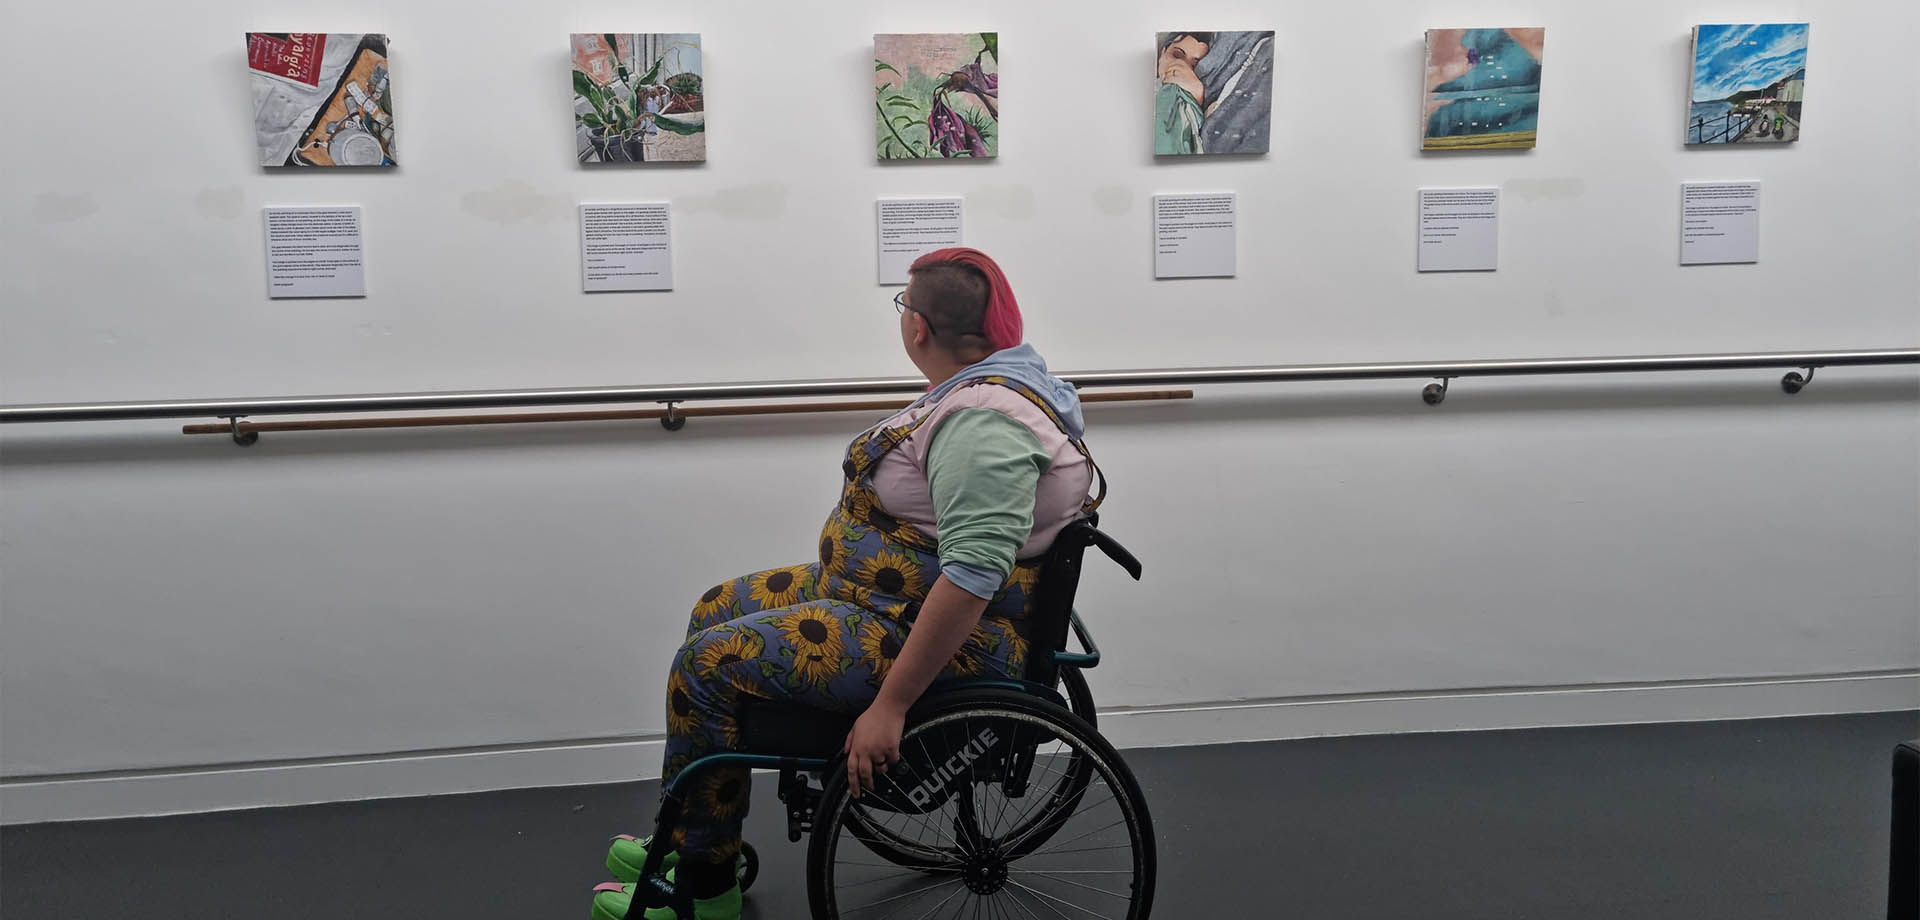 A person in a wheelchair in the foreground is turning away to look at six square paintings hung on a white wall.